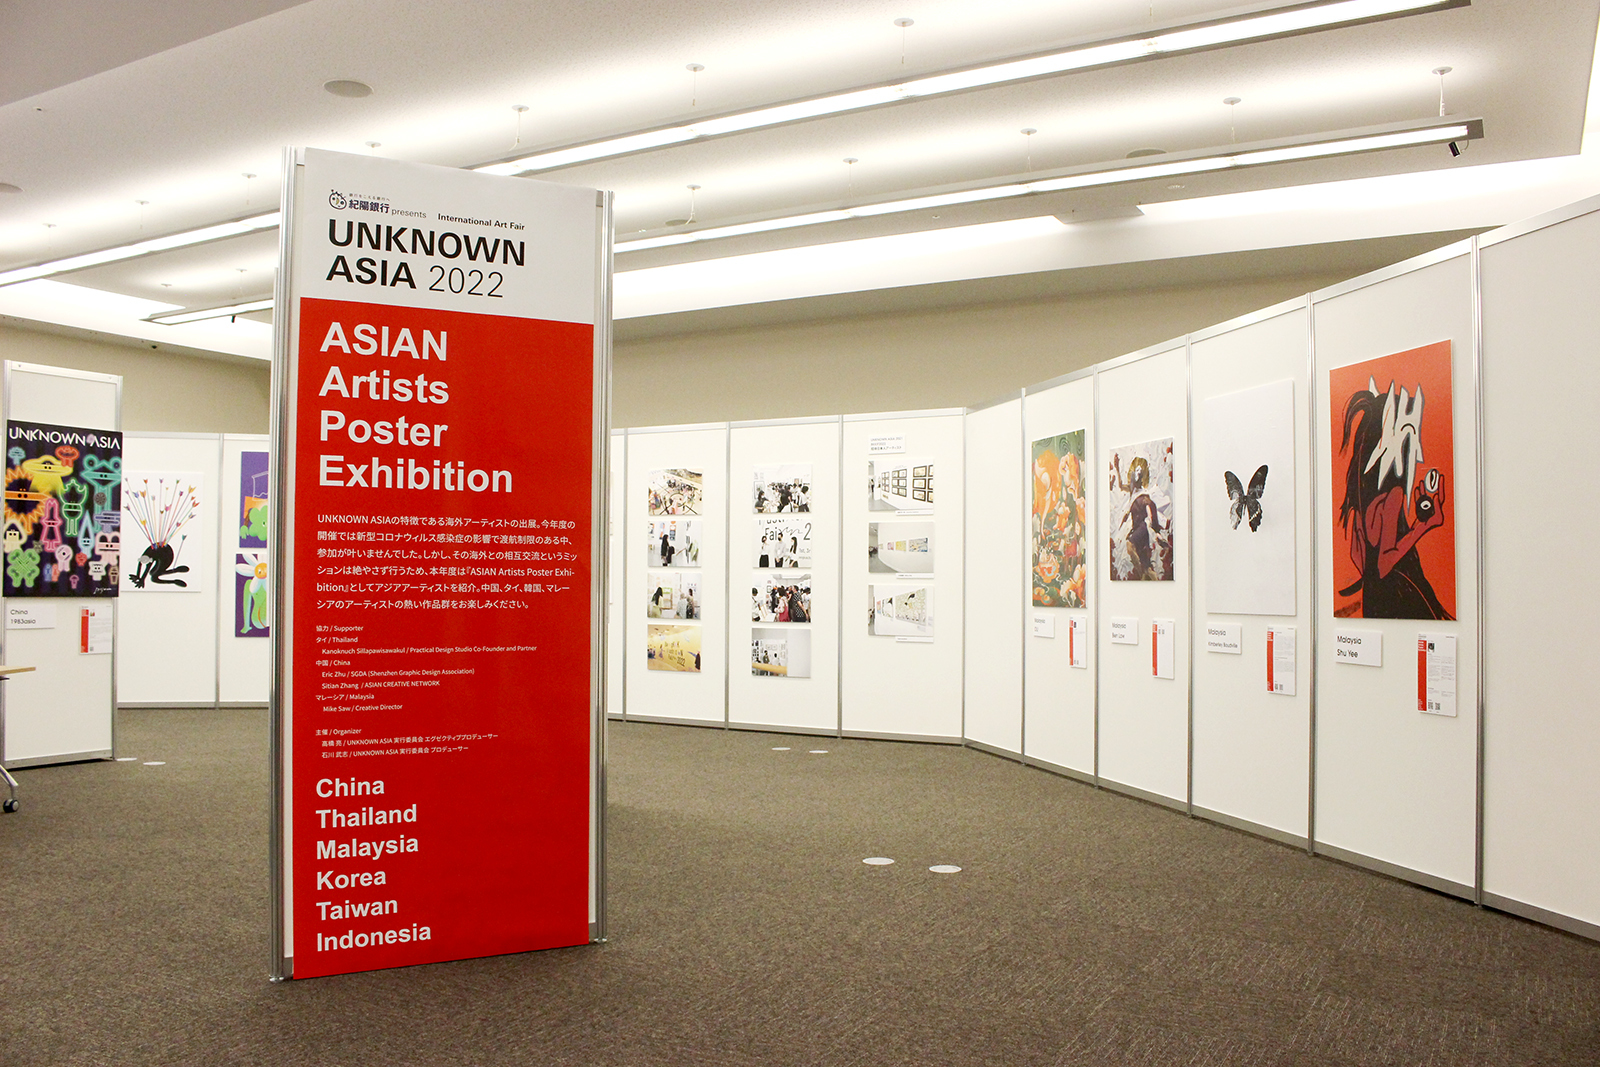 ASIAN Artists Poster Exhibition